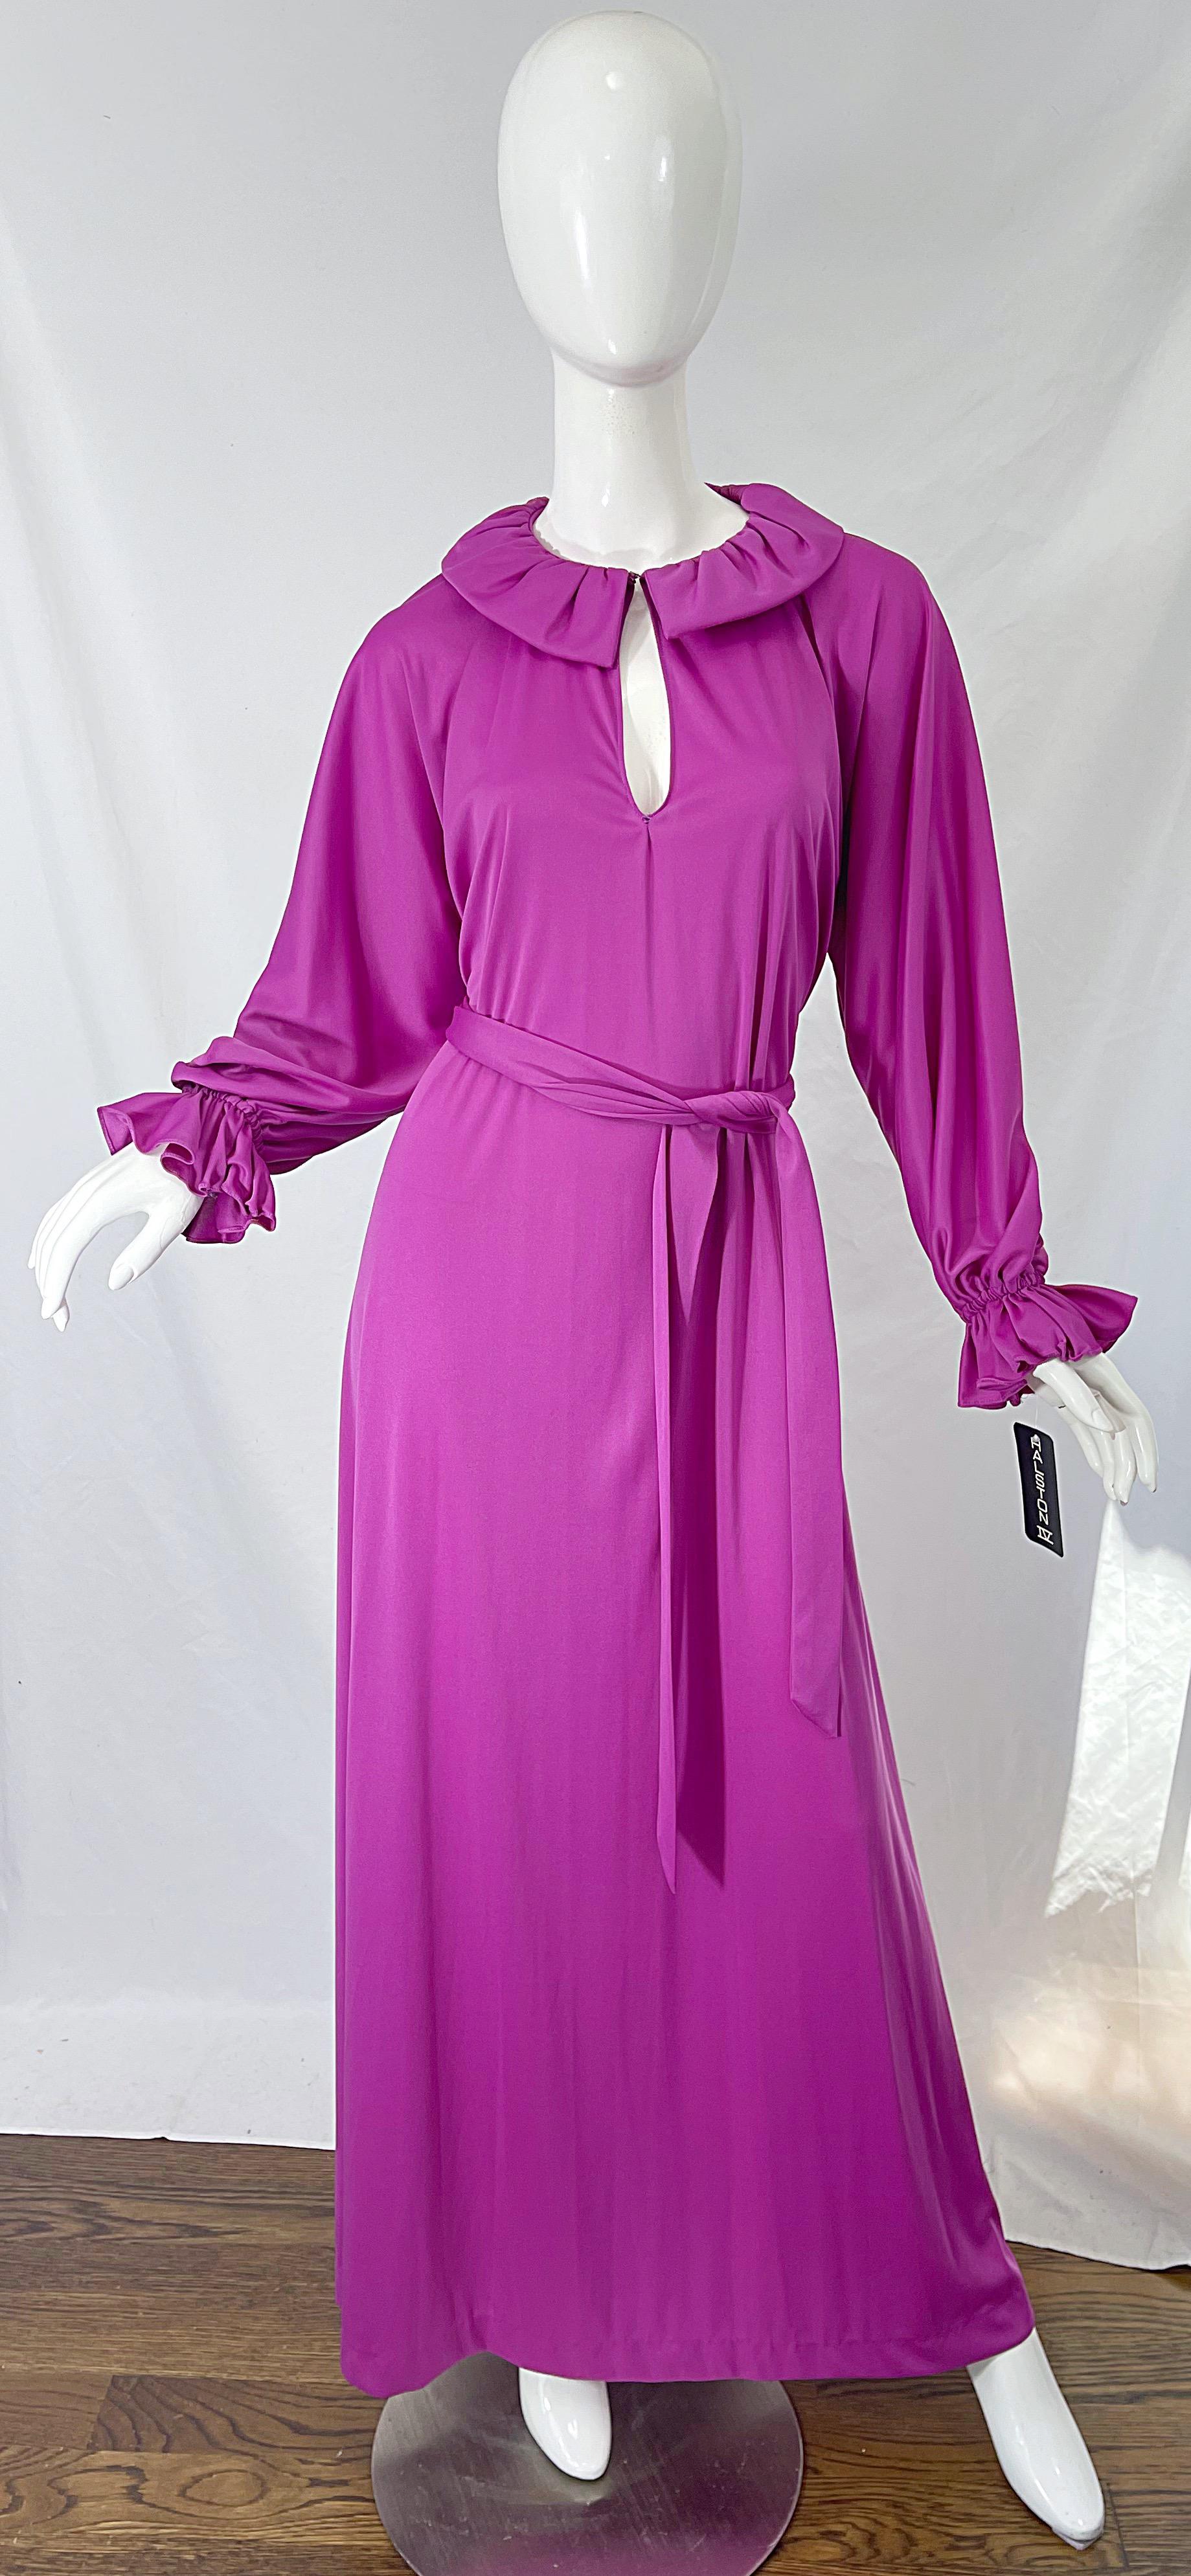 Deadstock (new with original store tags attached) 1970s HALSTON IV purple/pink long sleeve maxi dress ! Features a slinky jersey with a matching tie belt. Hook-and-eye closure at center neck. 
In great unworn condition with store tags still